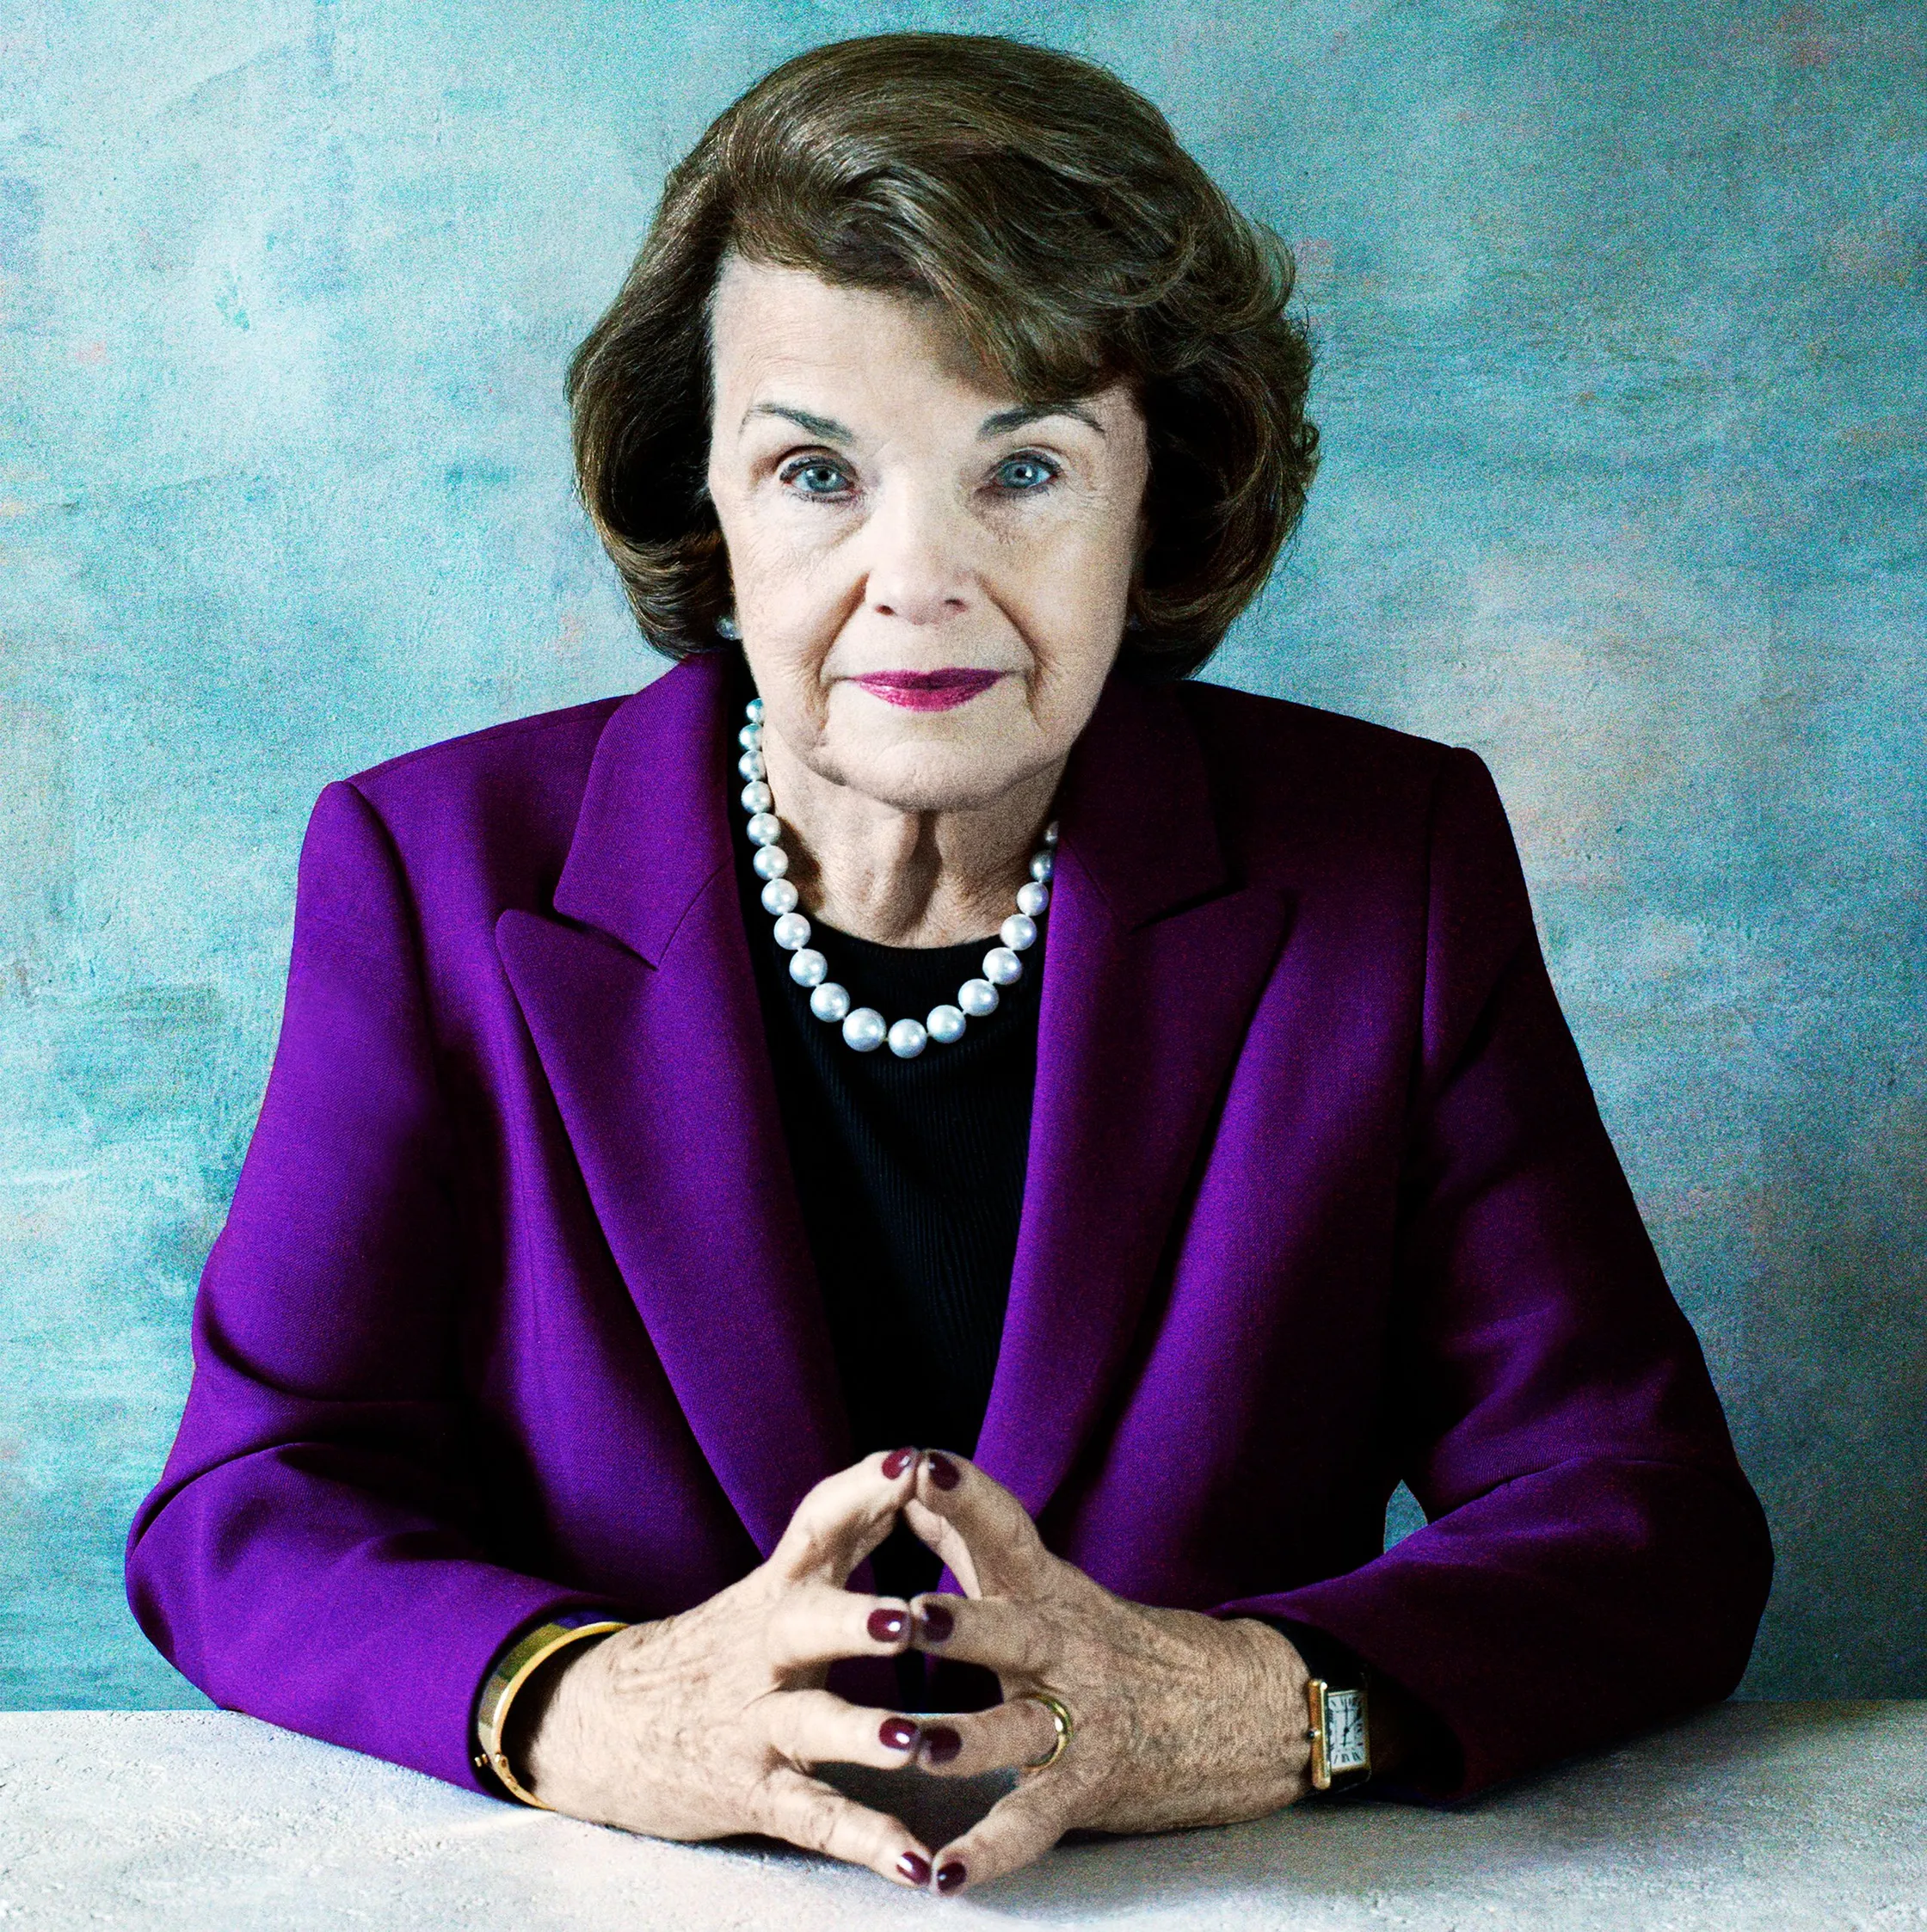 Remembering the Late Dianne Feinstein: An Ode to Her Life and Legacy